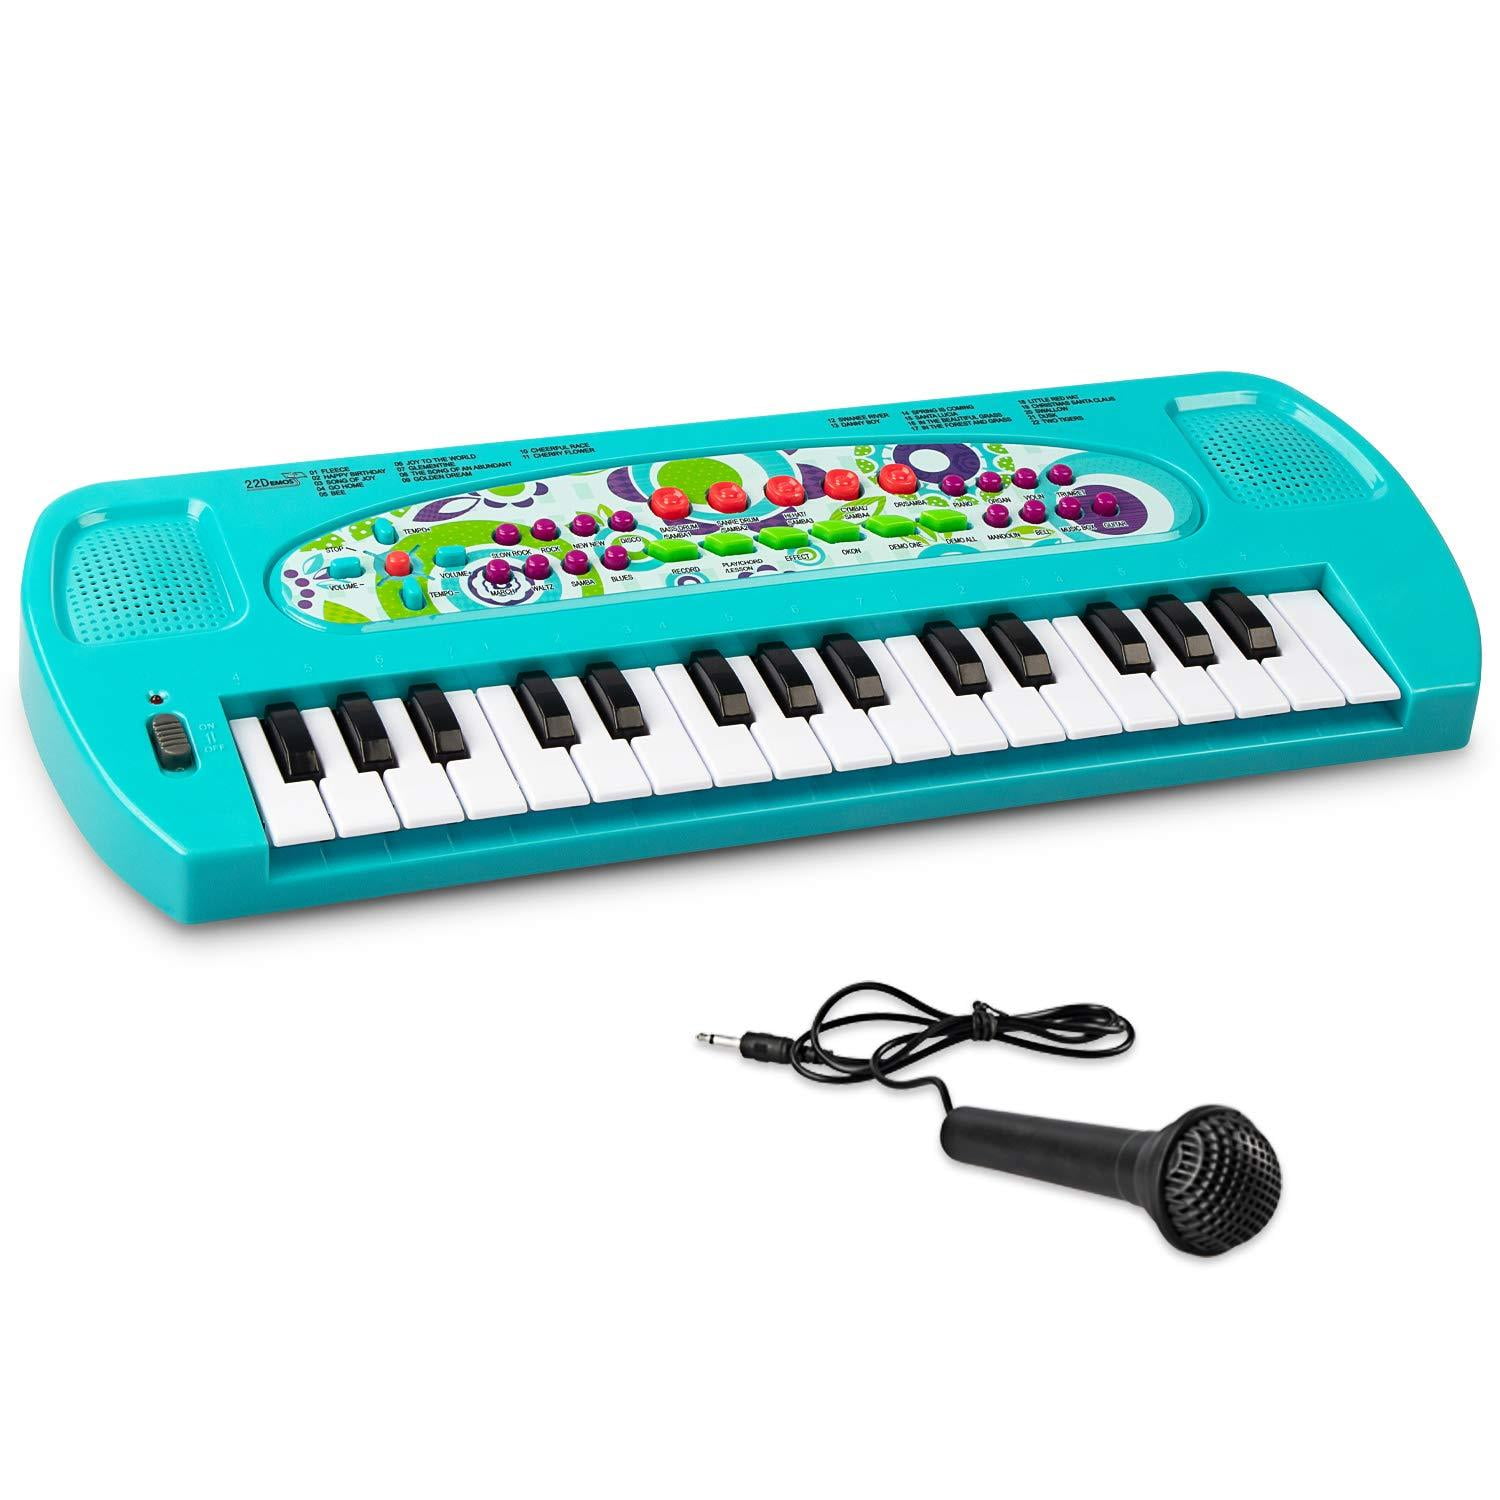 SAOCOOL Piano Keyboard Blue 32 Keys Multifunction Electronic Kids Toy Piano keyboard Music child piano keyboard for toddler with Microphone 